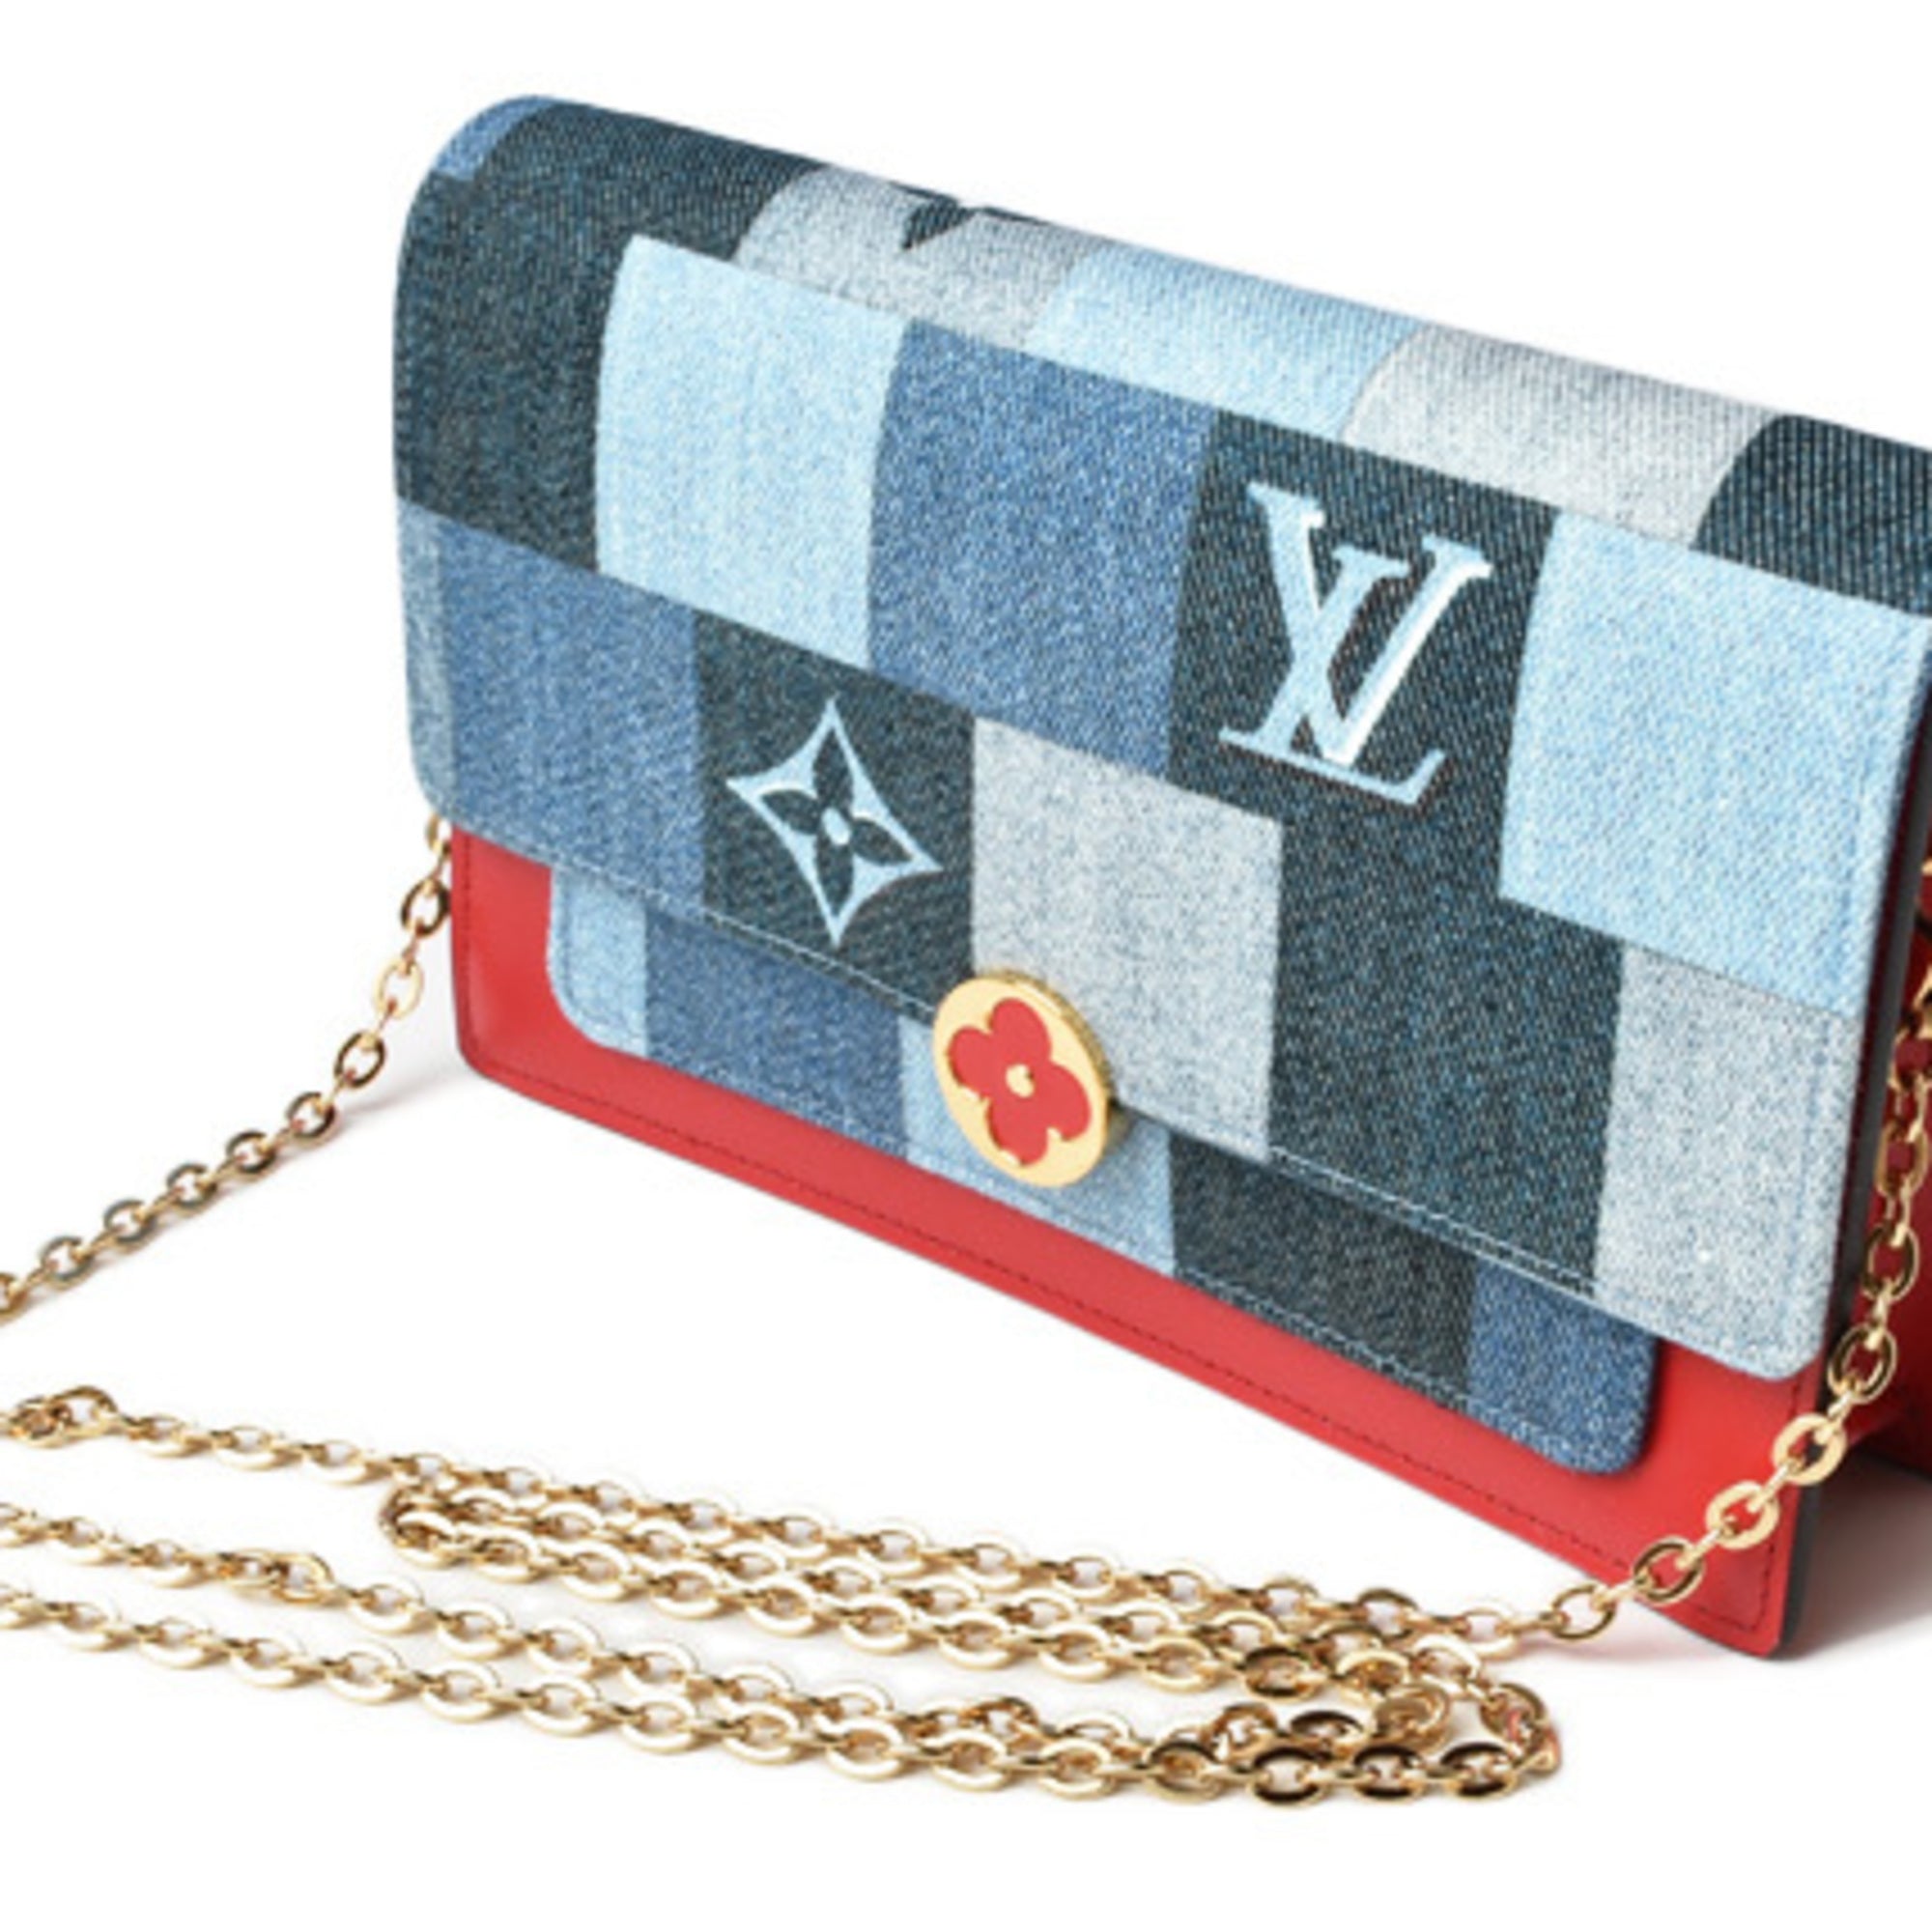 Buy Preowned  Brand new Luxury Louis Vuitton Flore Chain Monogram Canvas  Wallet Online  LuxepolisCom